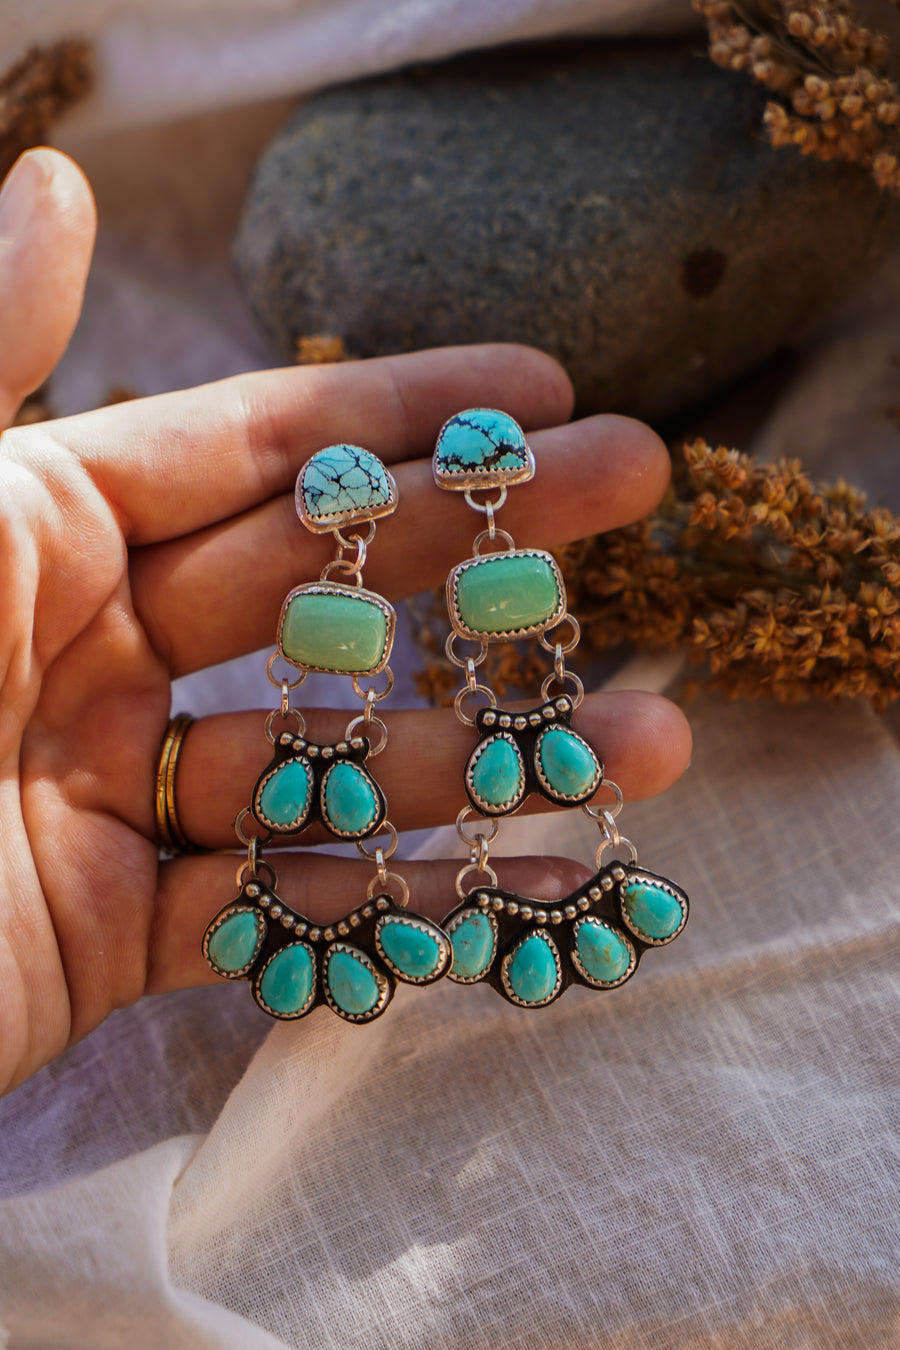 Statement Earrings in Yungai, Crysophase, & Campitos Turquoise